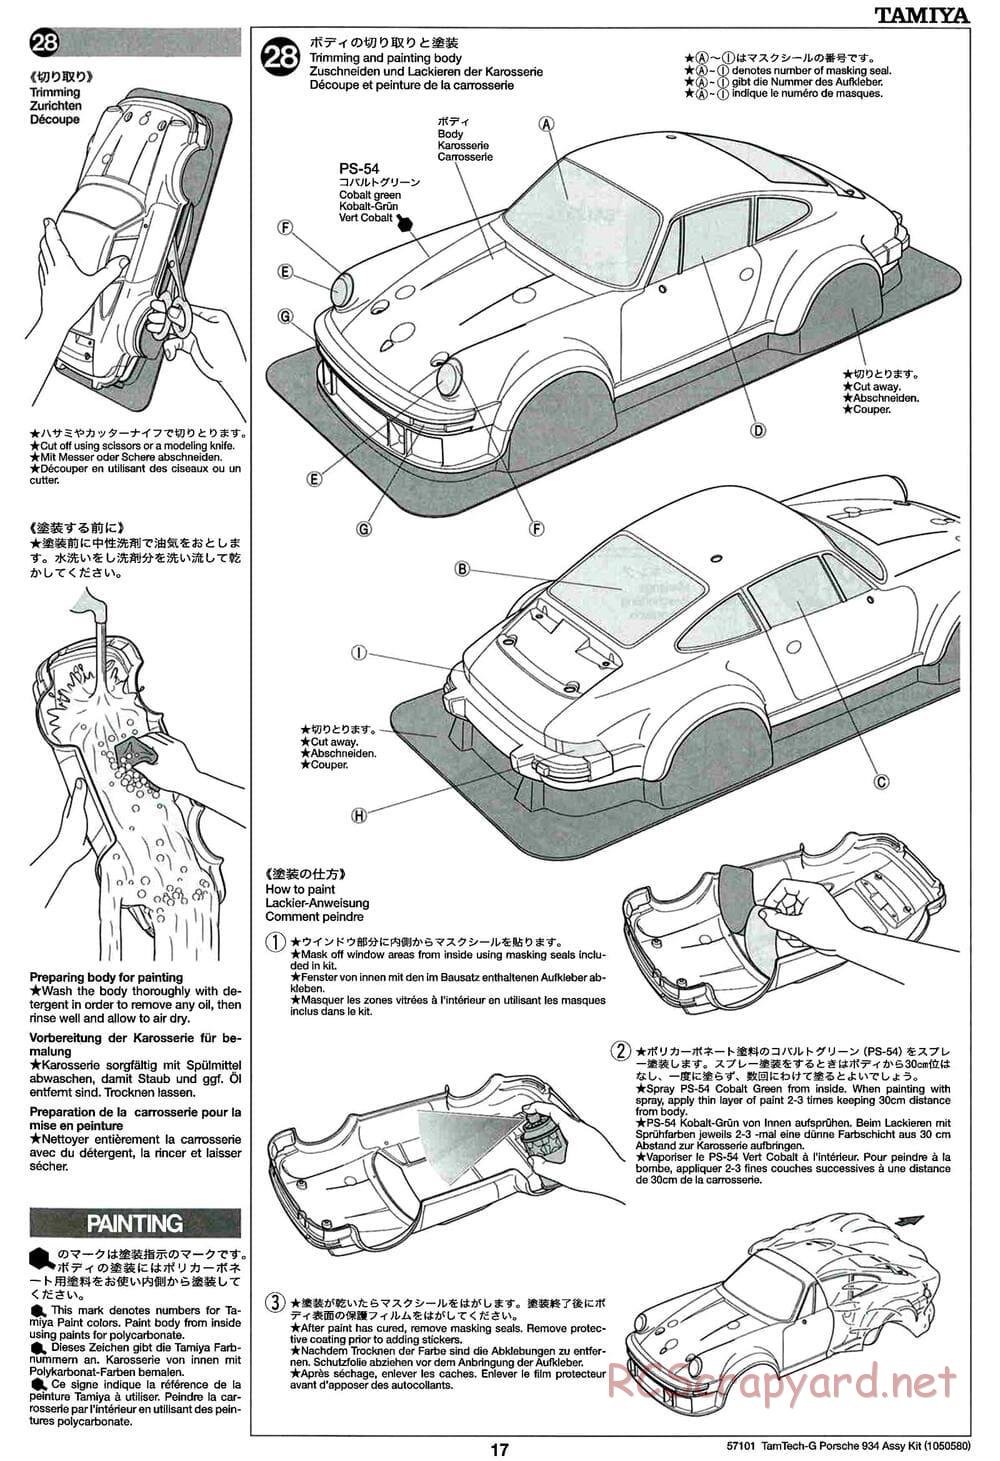 Tamiya - Porsche Turbo RSR - GT-01 Chassis - Manual - Page 17